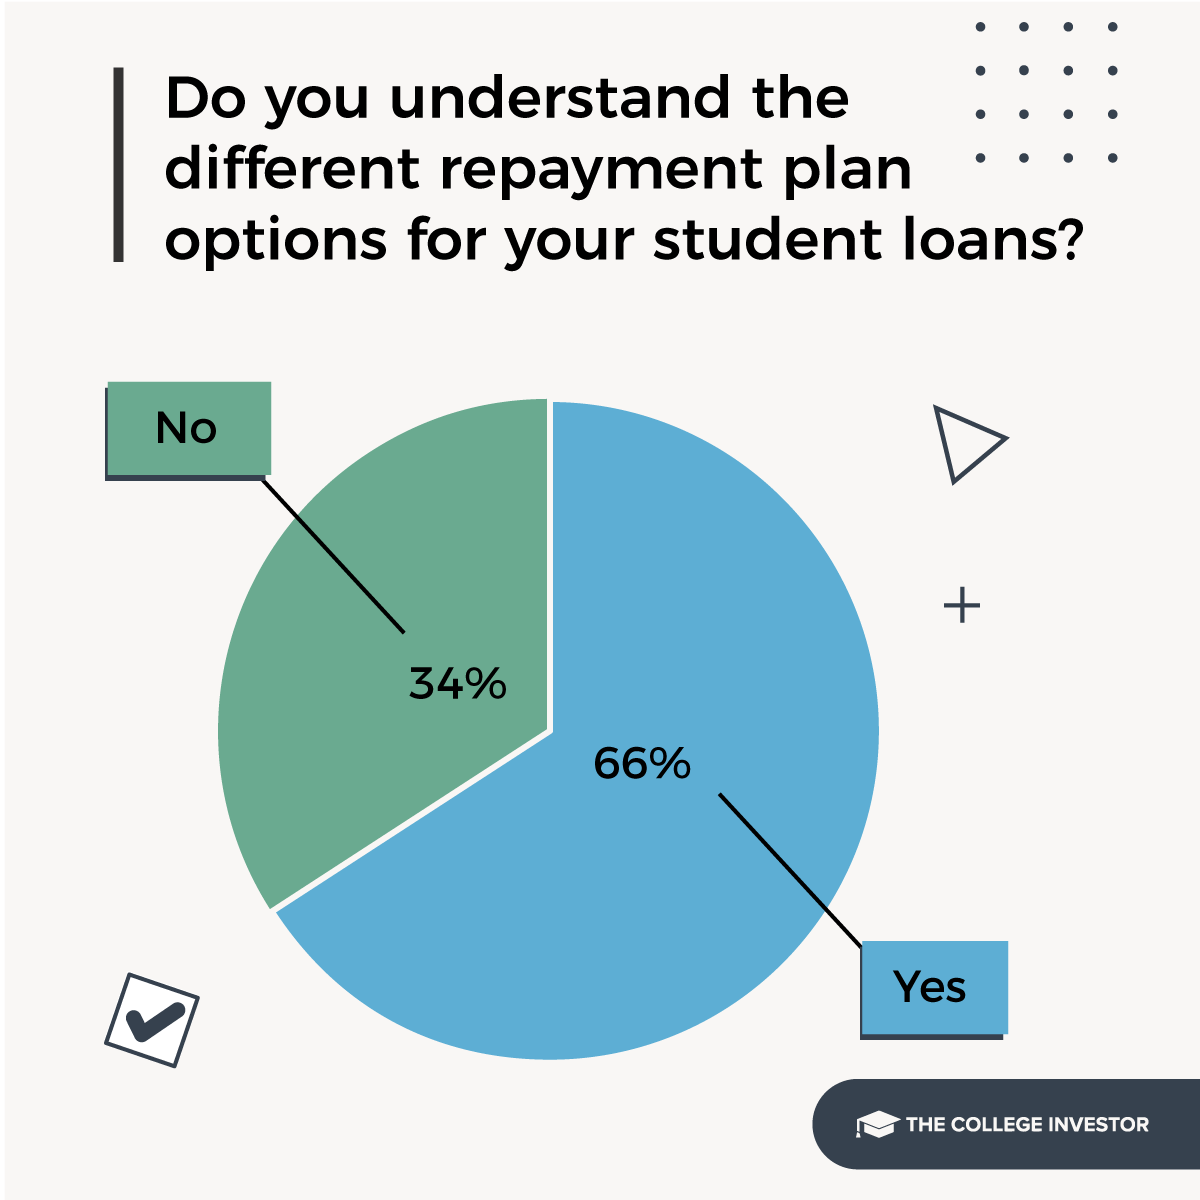 one-third of student loan borrowers don't know about different repayment plans